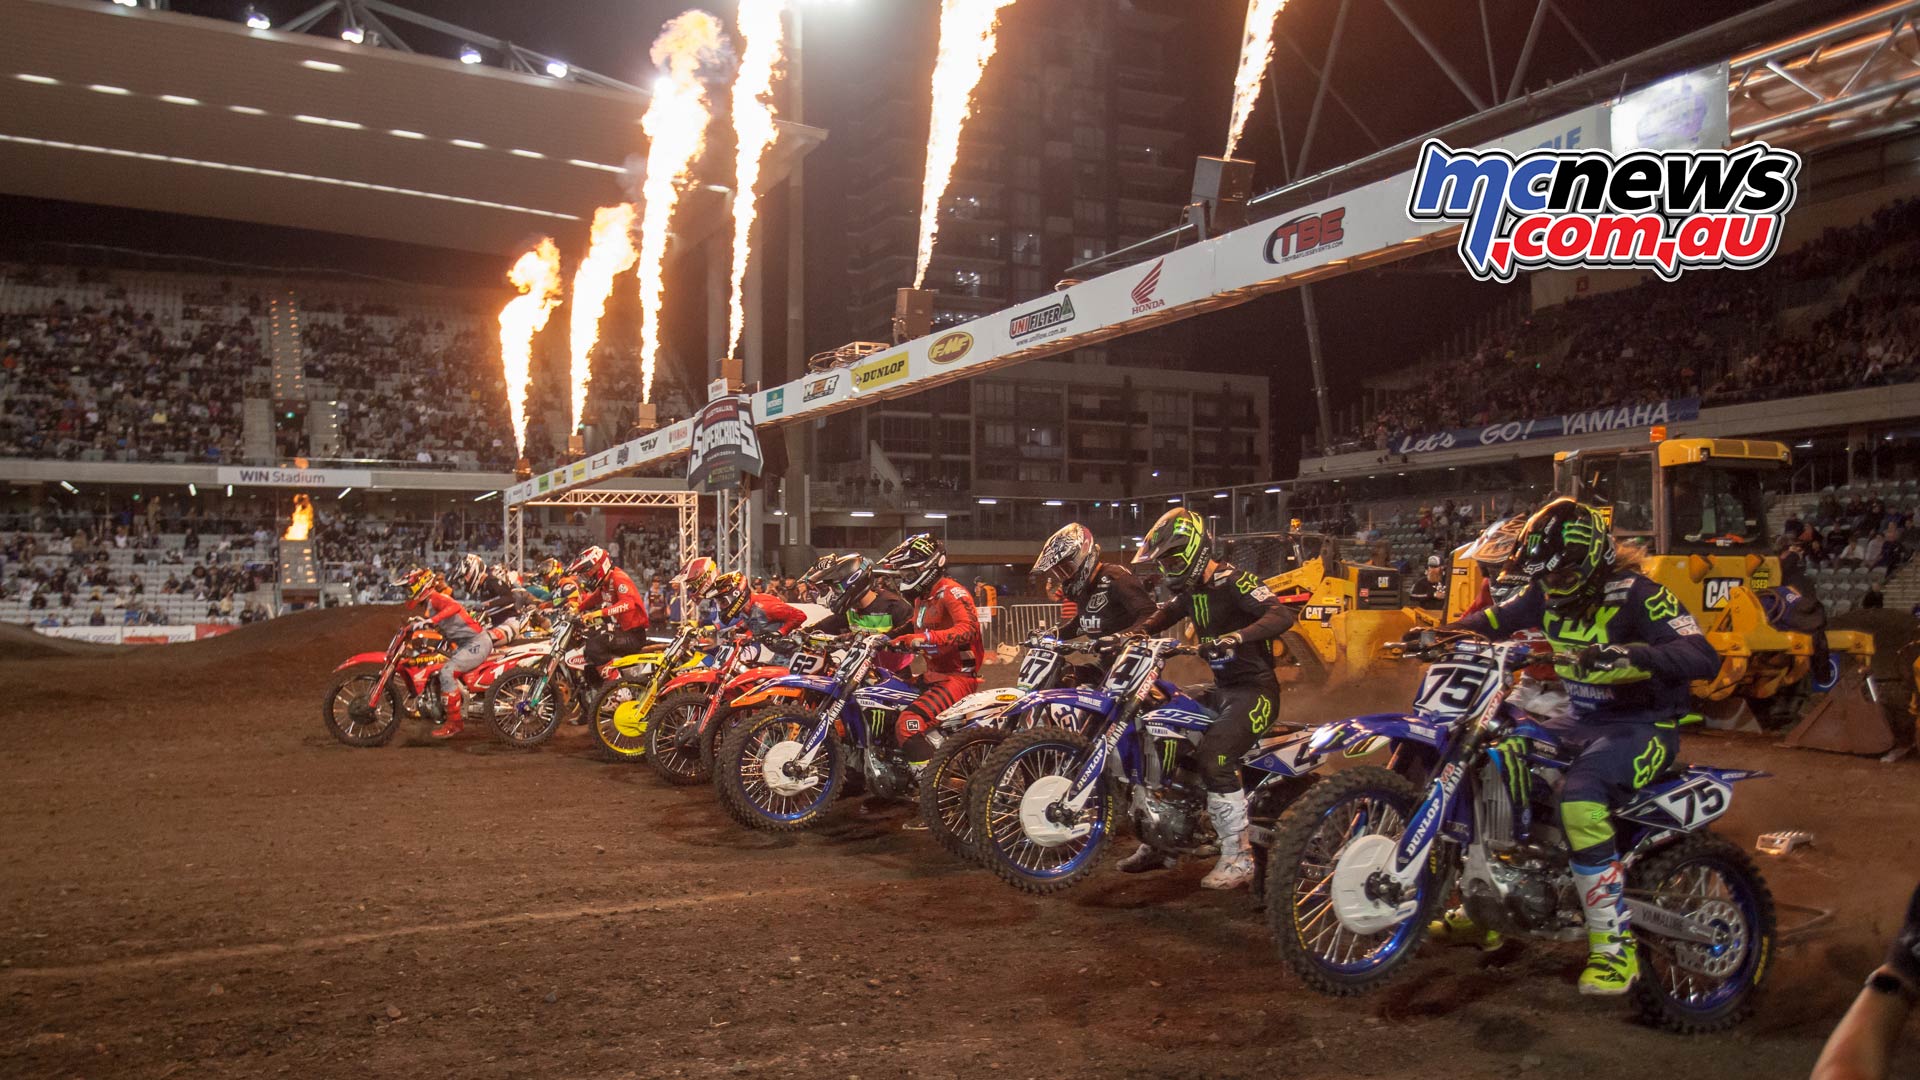 2019 Australian SX Round 3 Wollongong Images | Gallery C - Mcnews.com.au